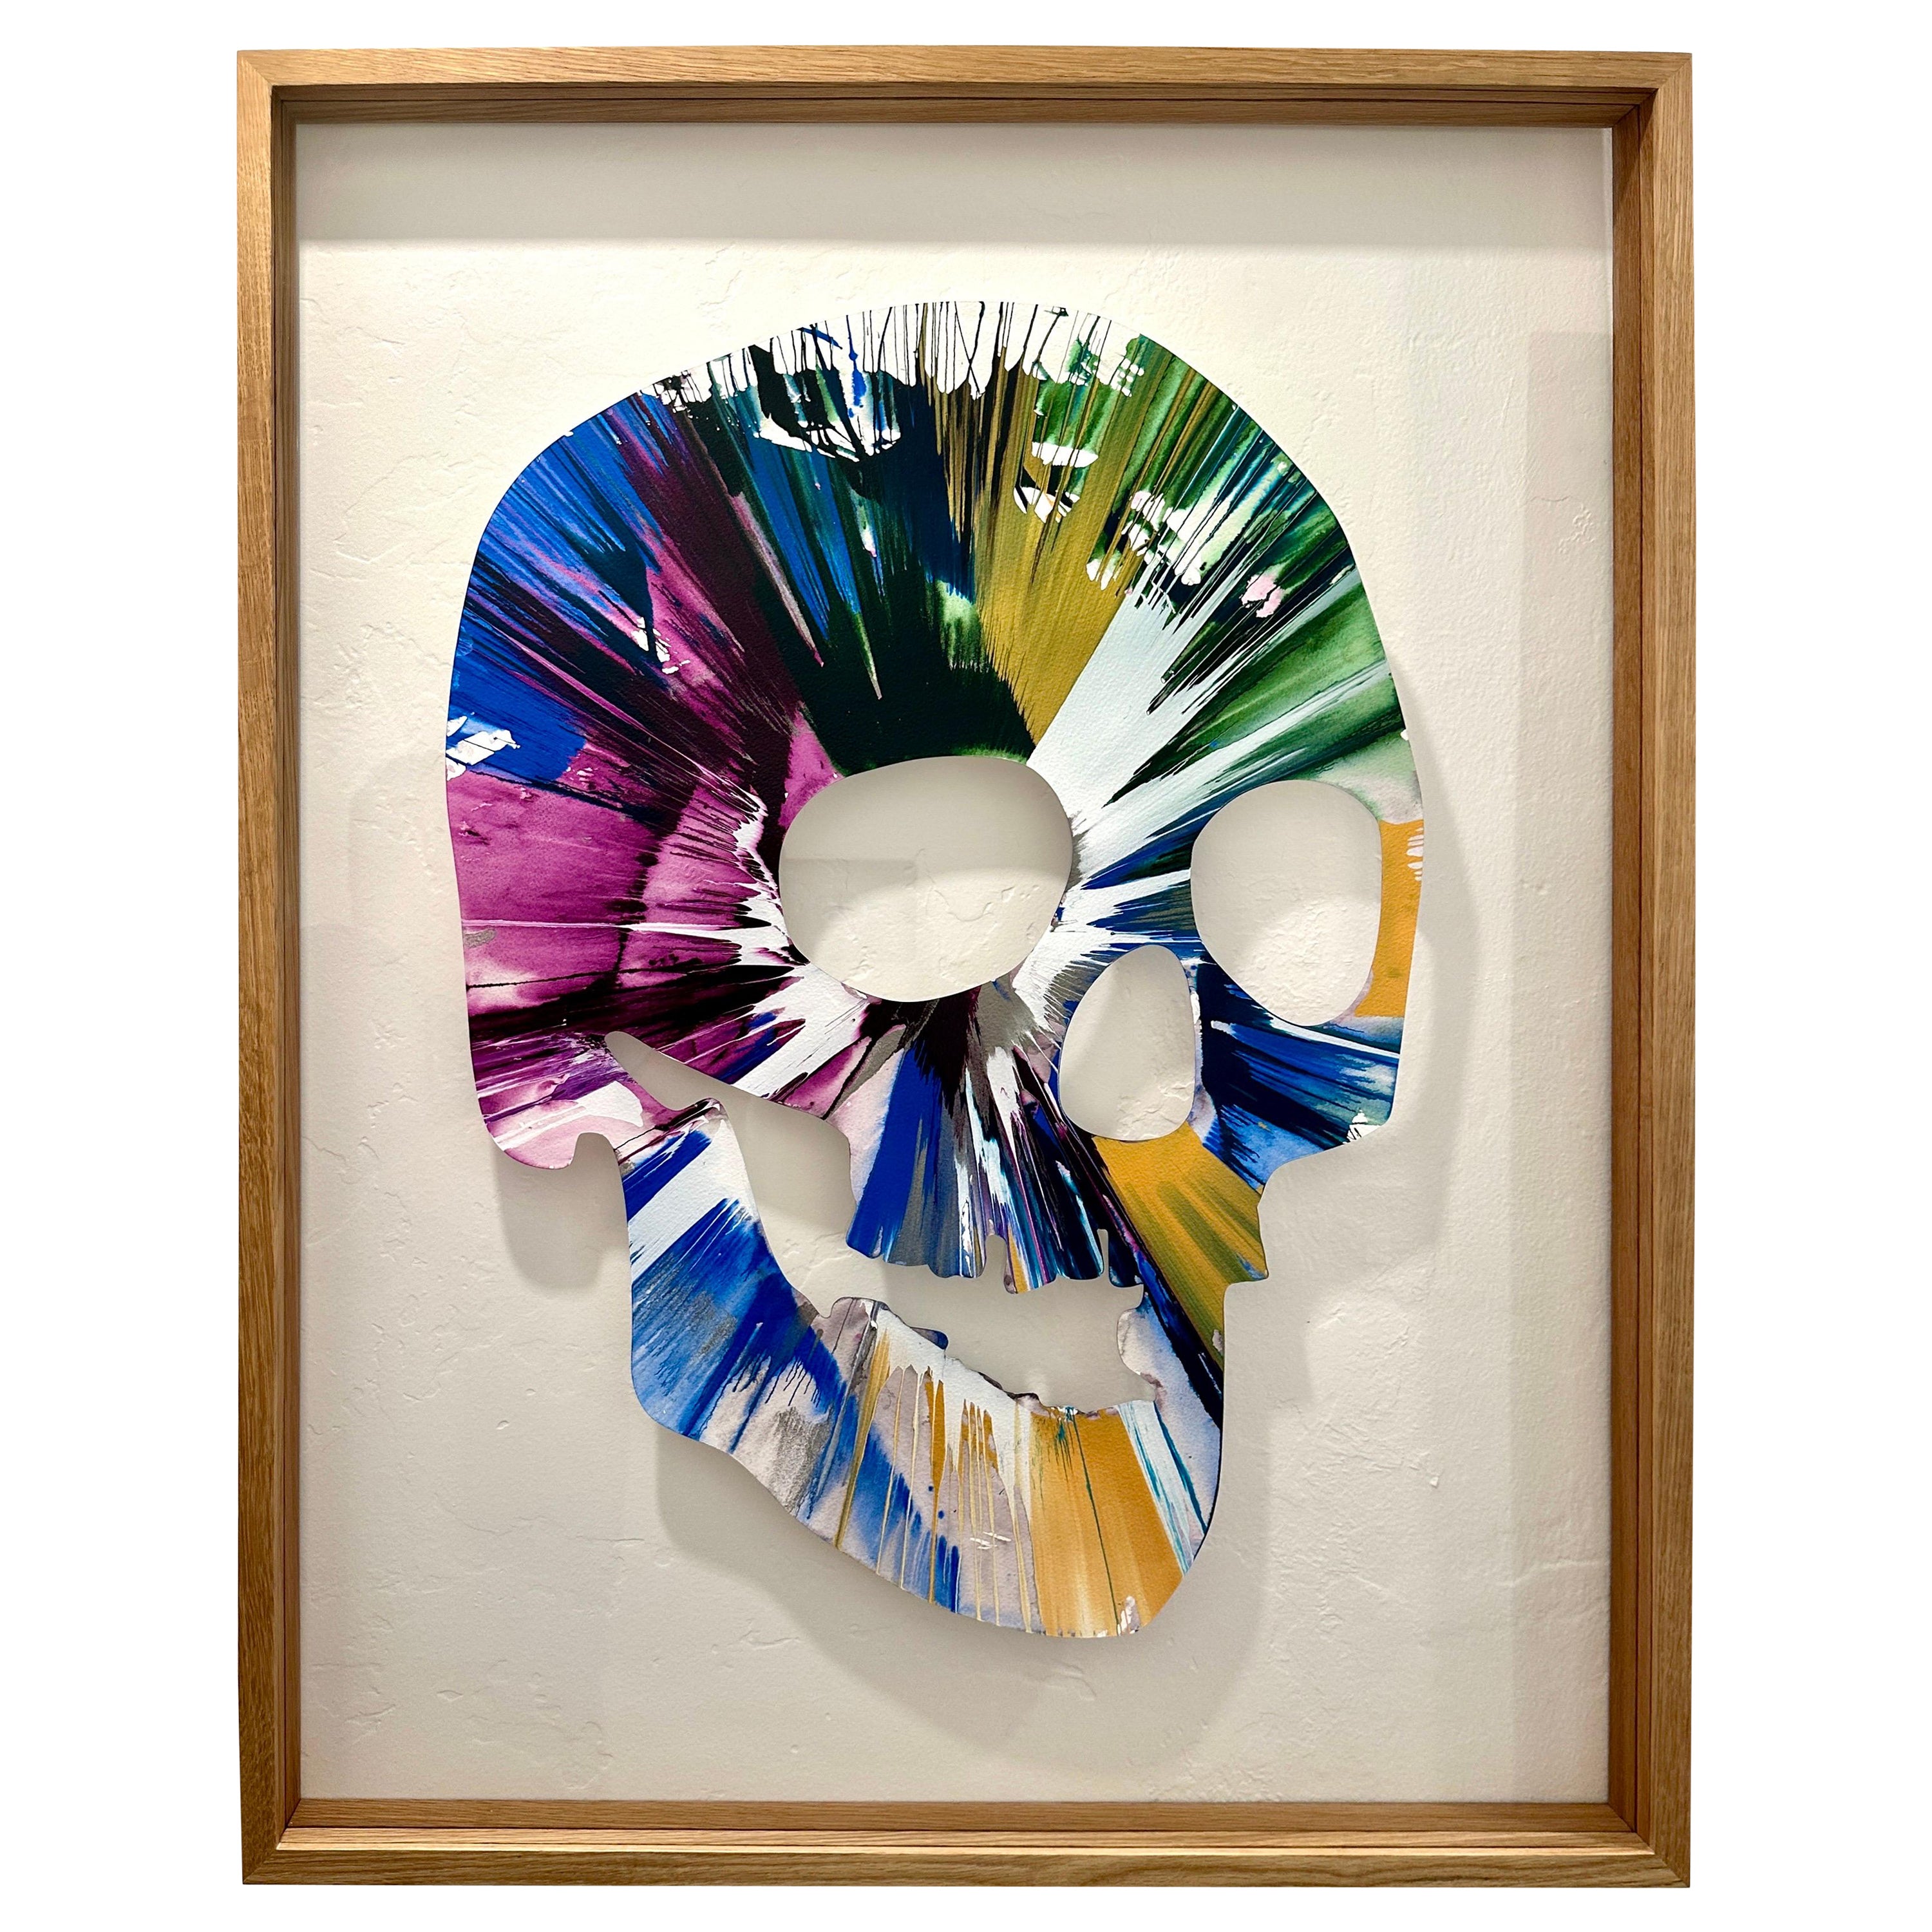 Damien Hirst Skull Spin Painting (Created at Damien Hirst Spin Workshop), 2009